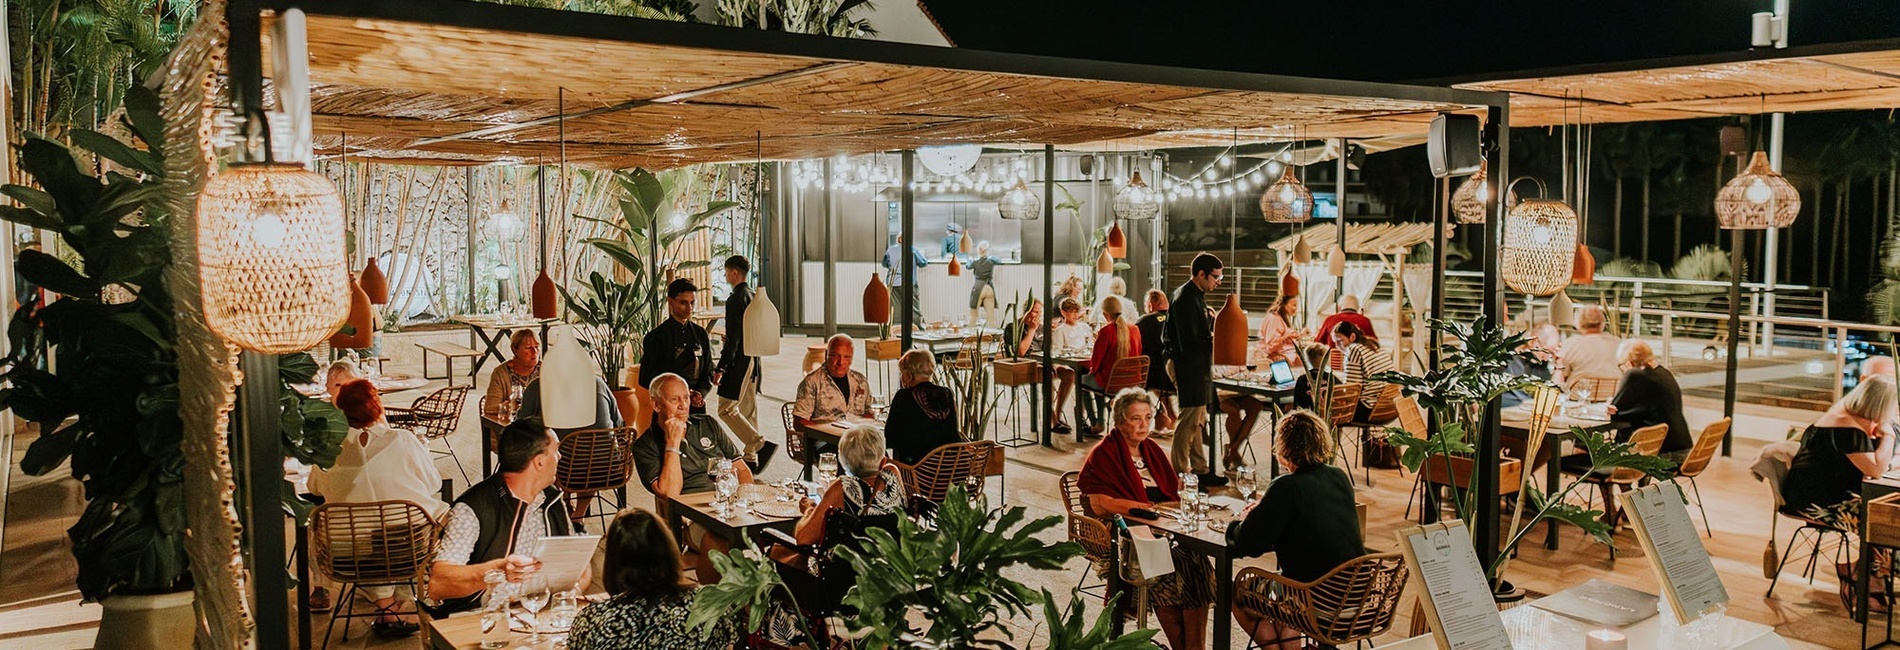 a group of people are sitting at tables in a restaurant